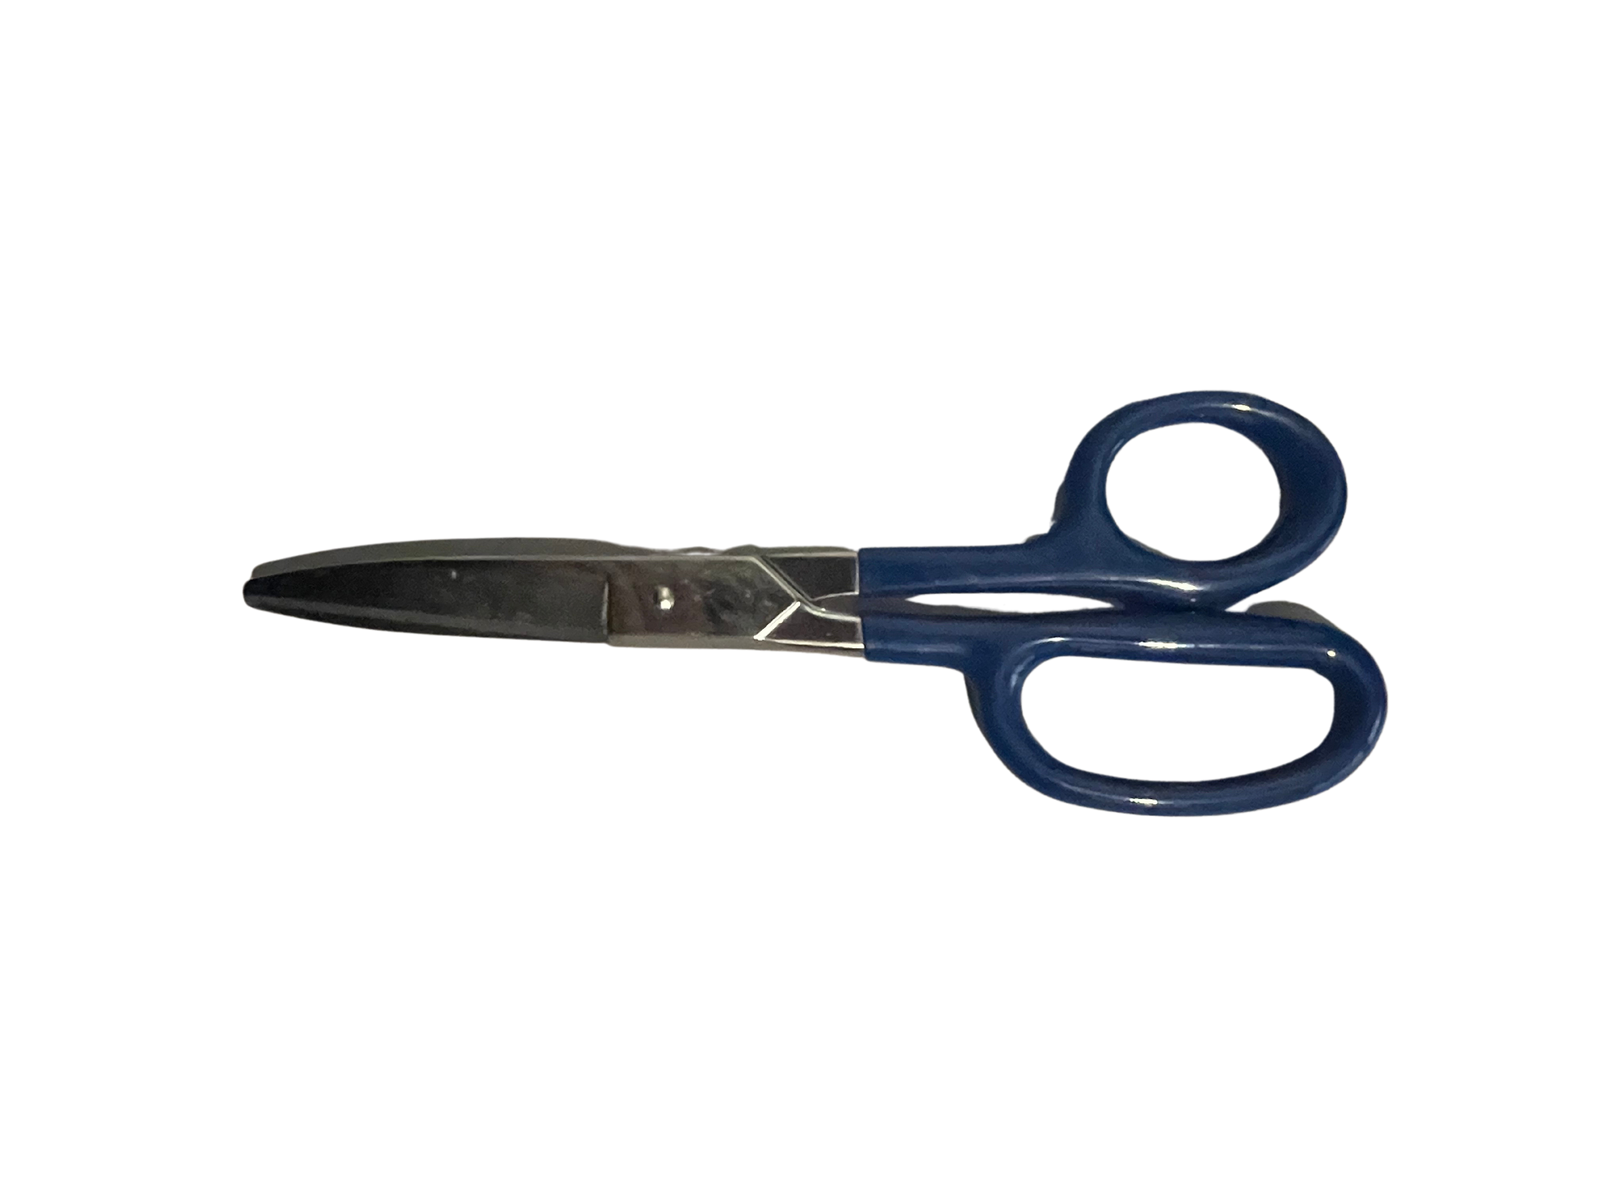 Left Handed High Leverage Leather Shears